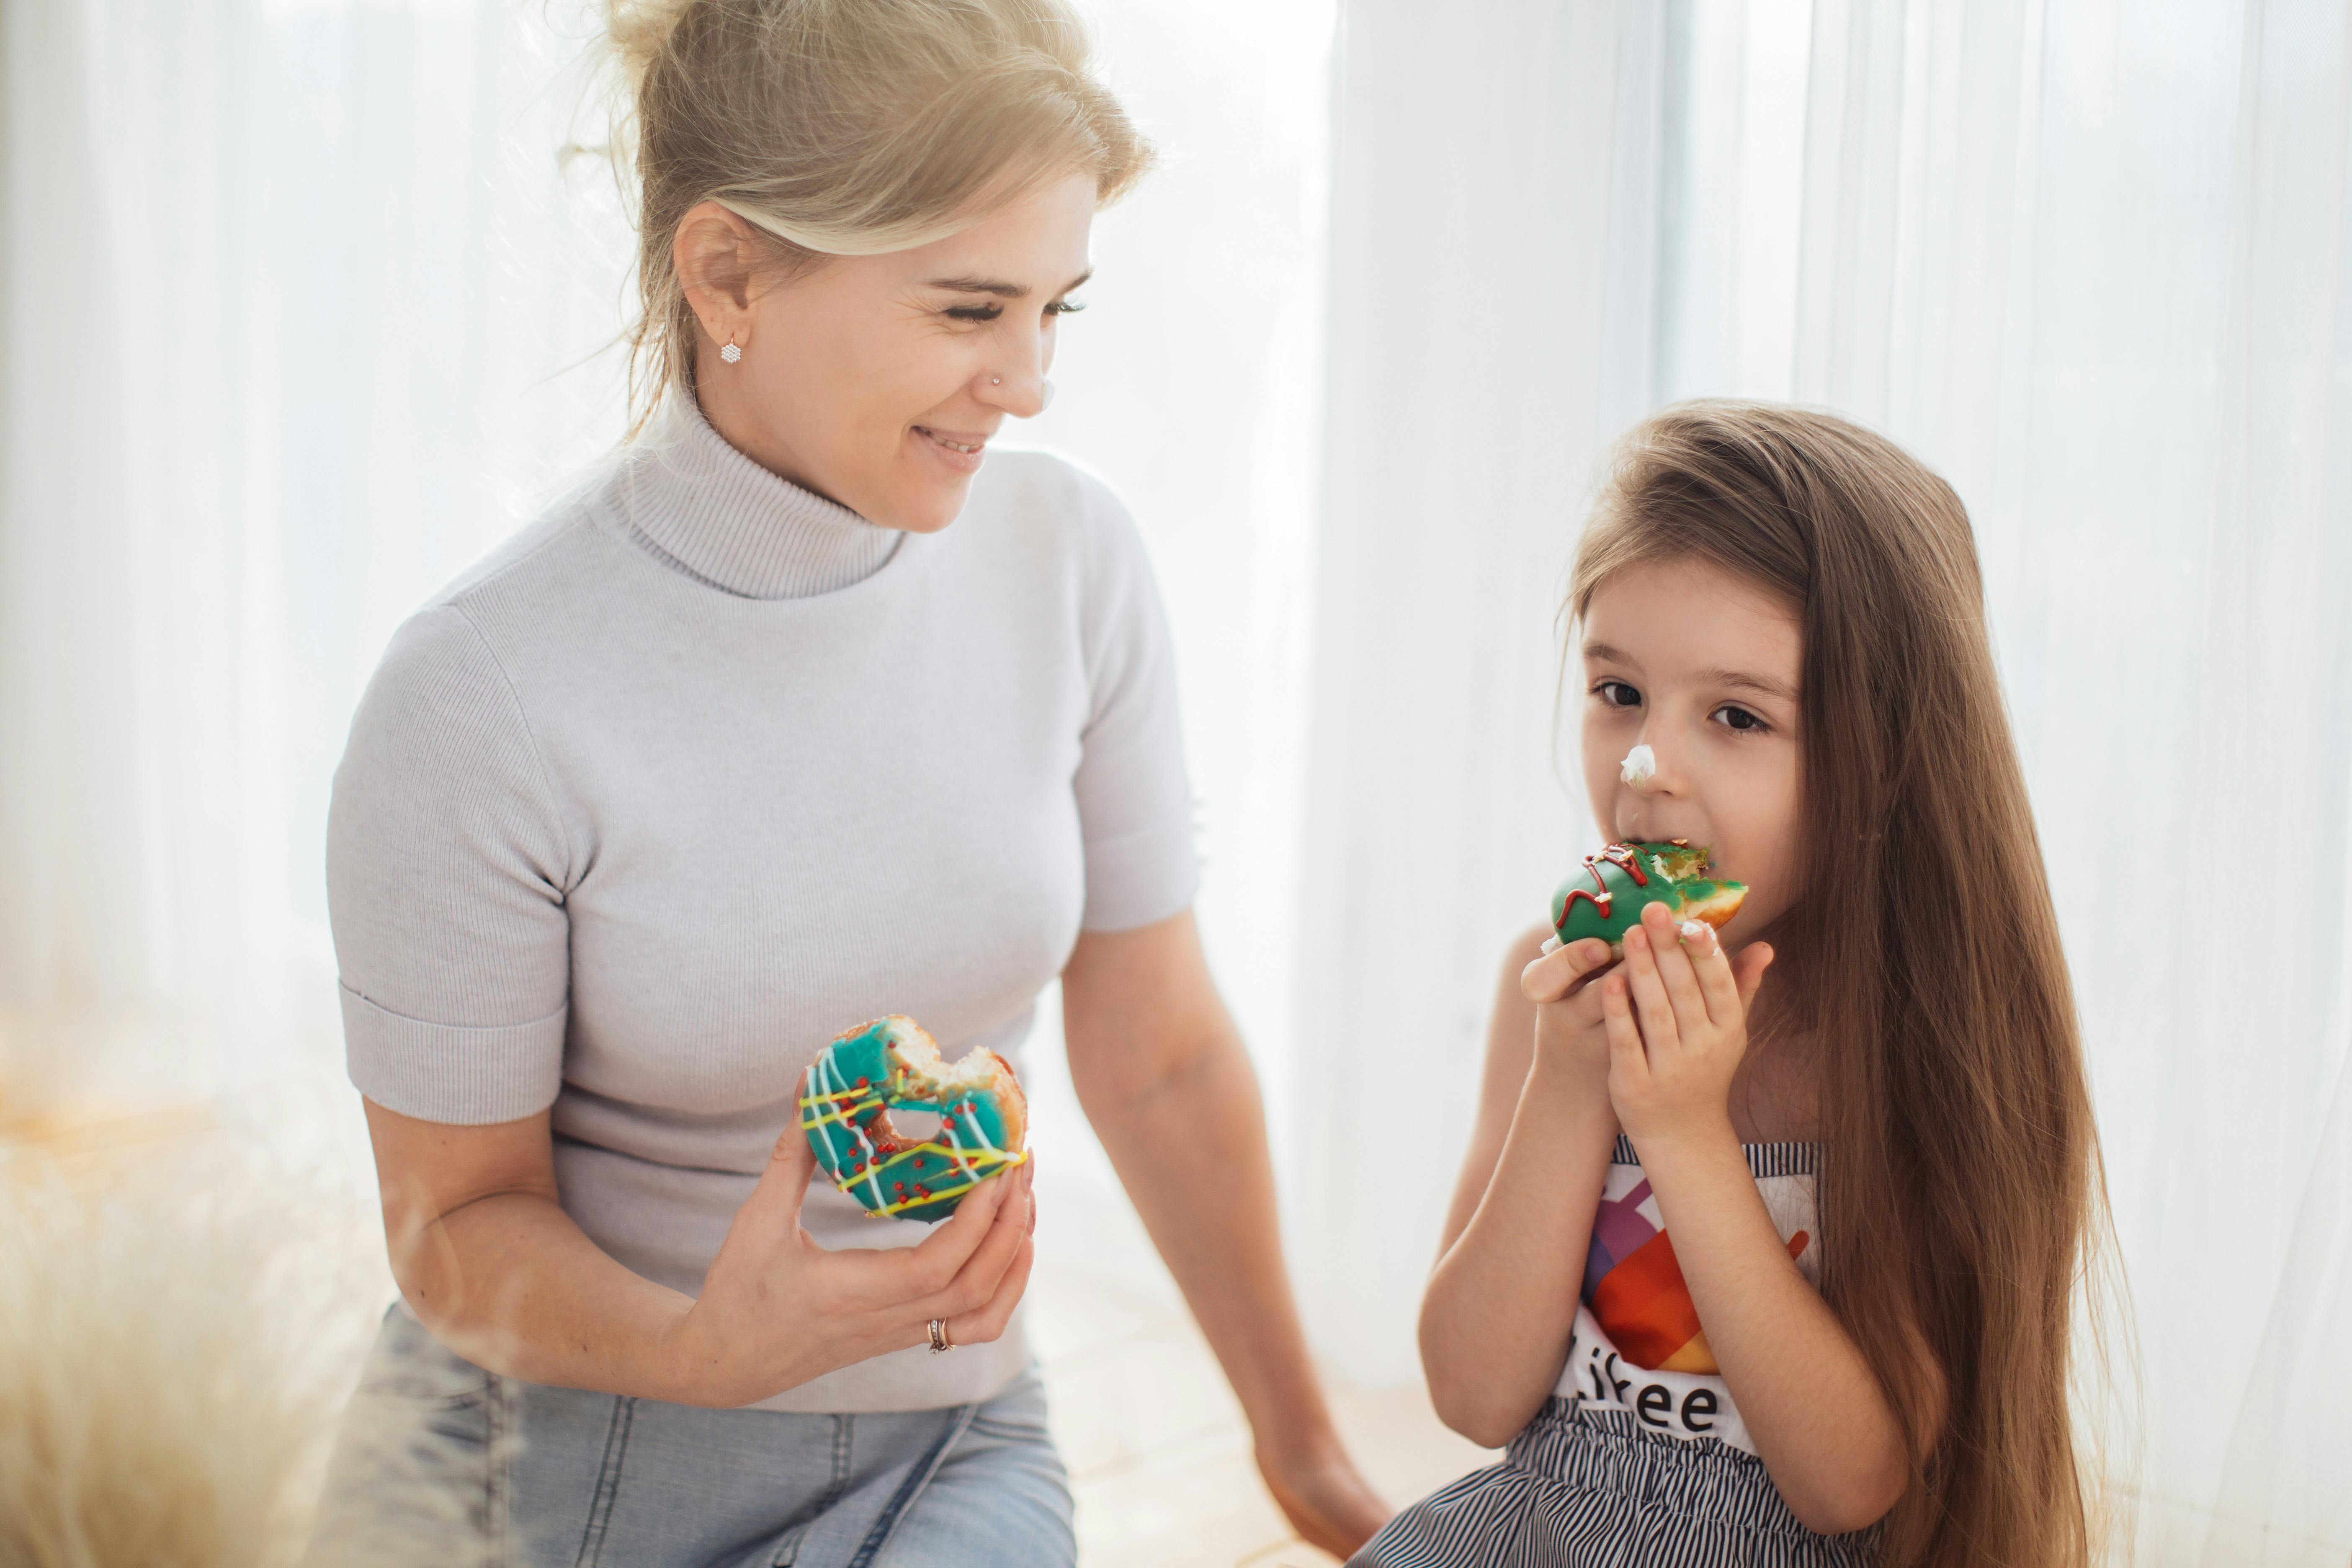 A mother and daughter enjoying donuts | Source: Pexels